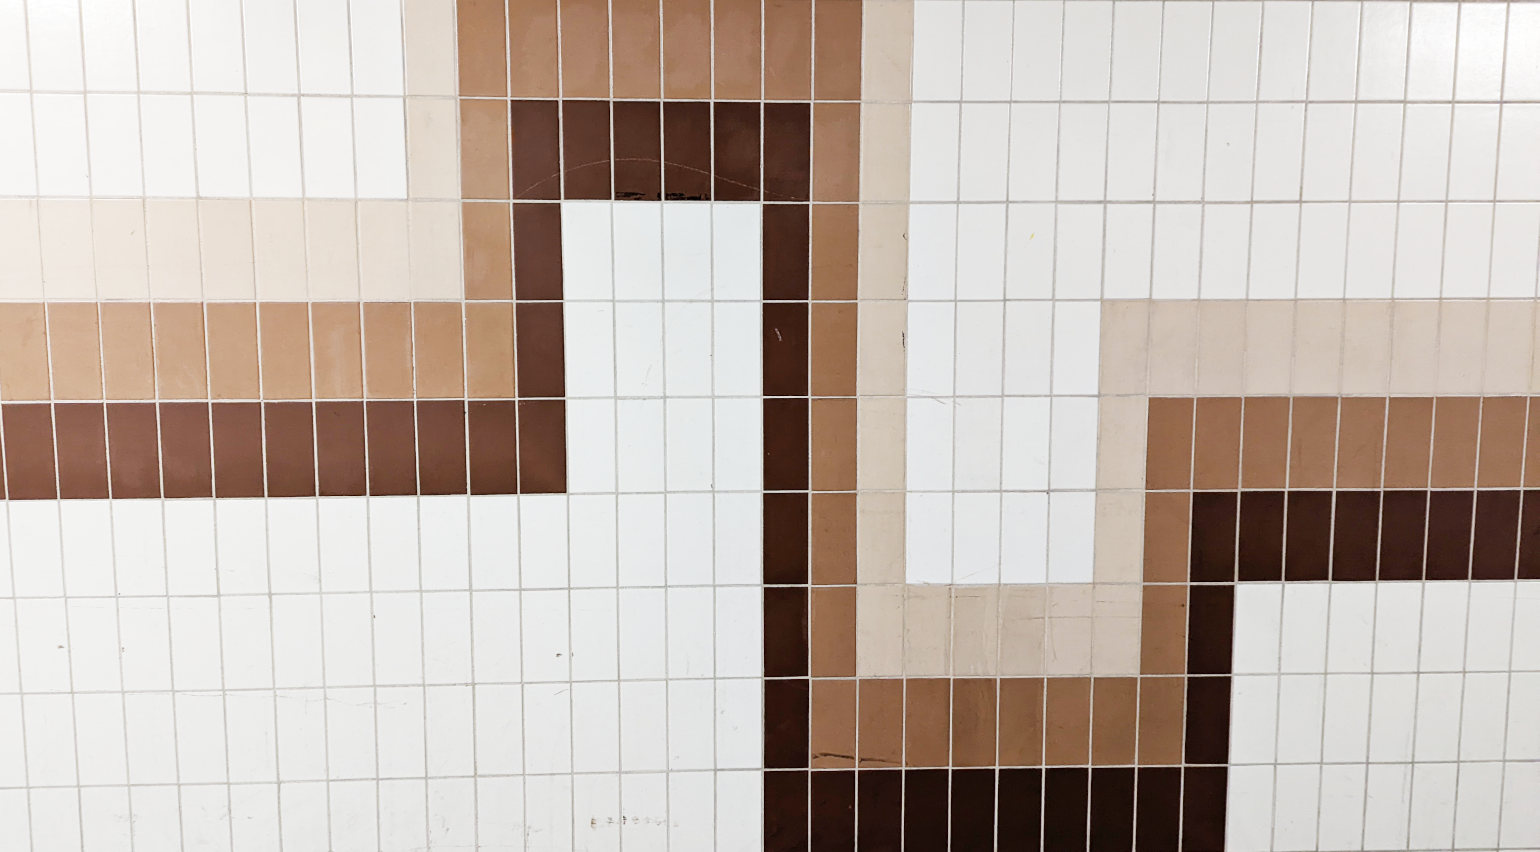 Wall with tiles of 4 colors in a pattern